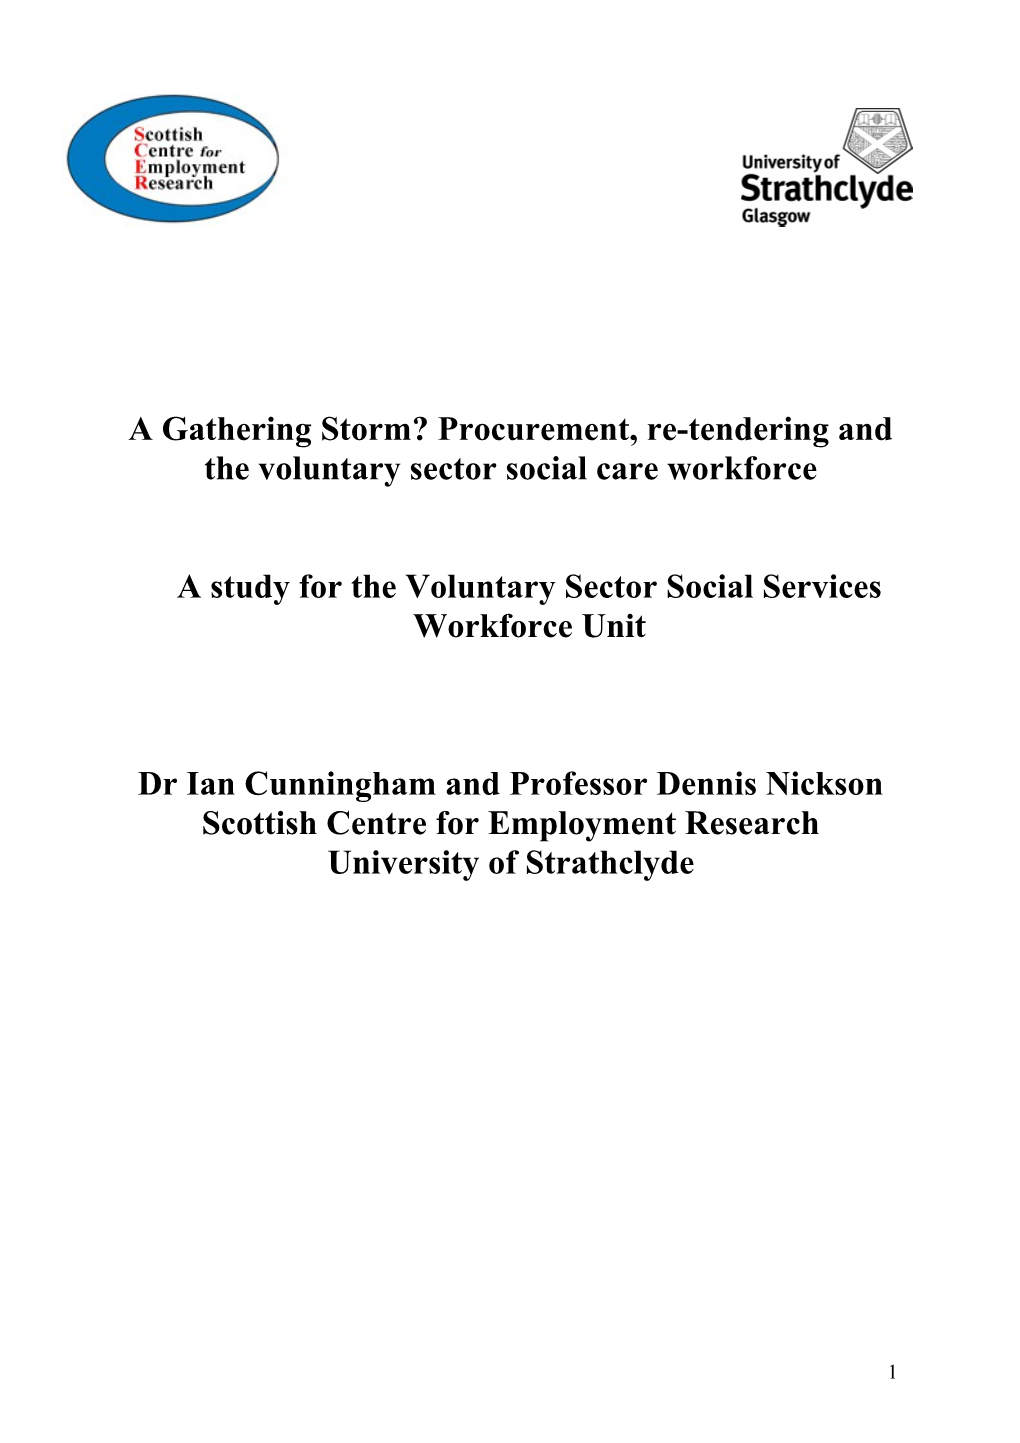 A Gathering Storm? Procurement, Re-Tendering and the Voluntary Sector Social Care Workforce